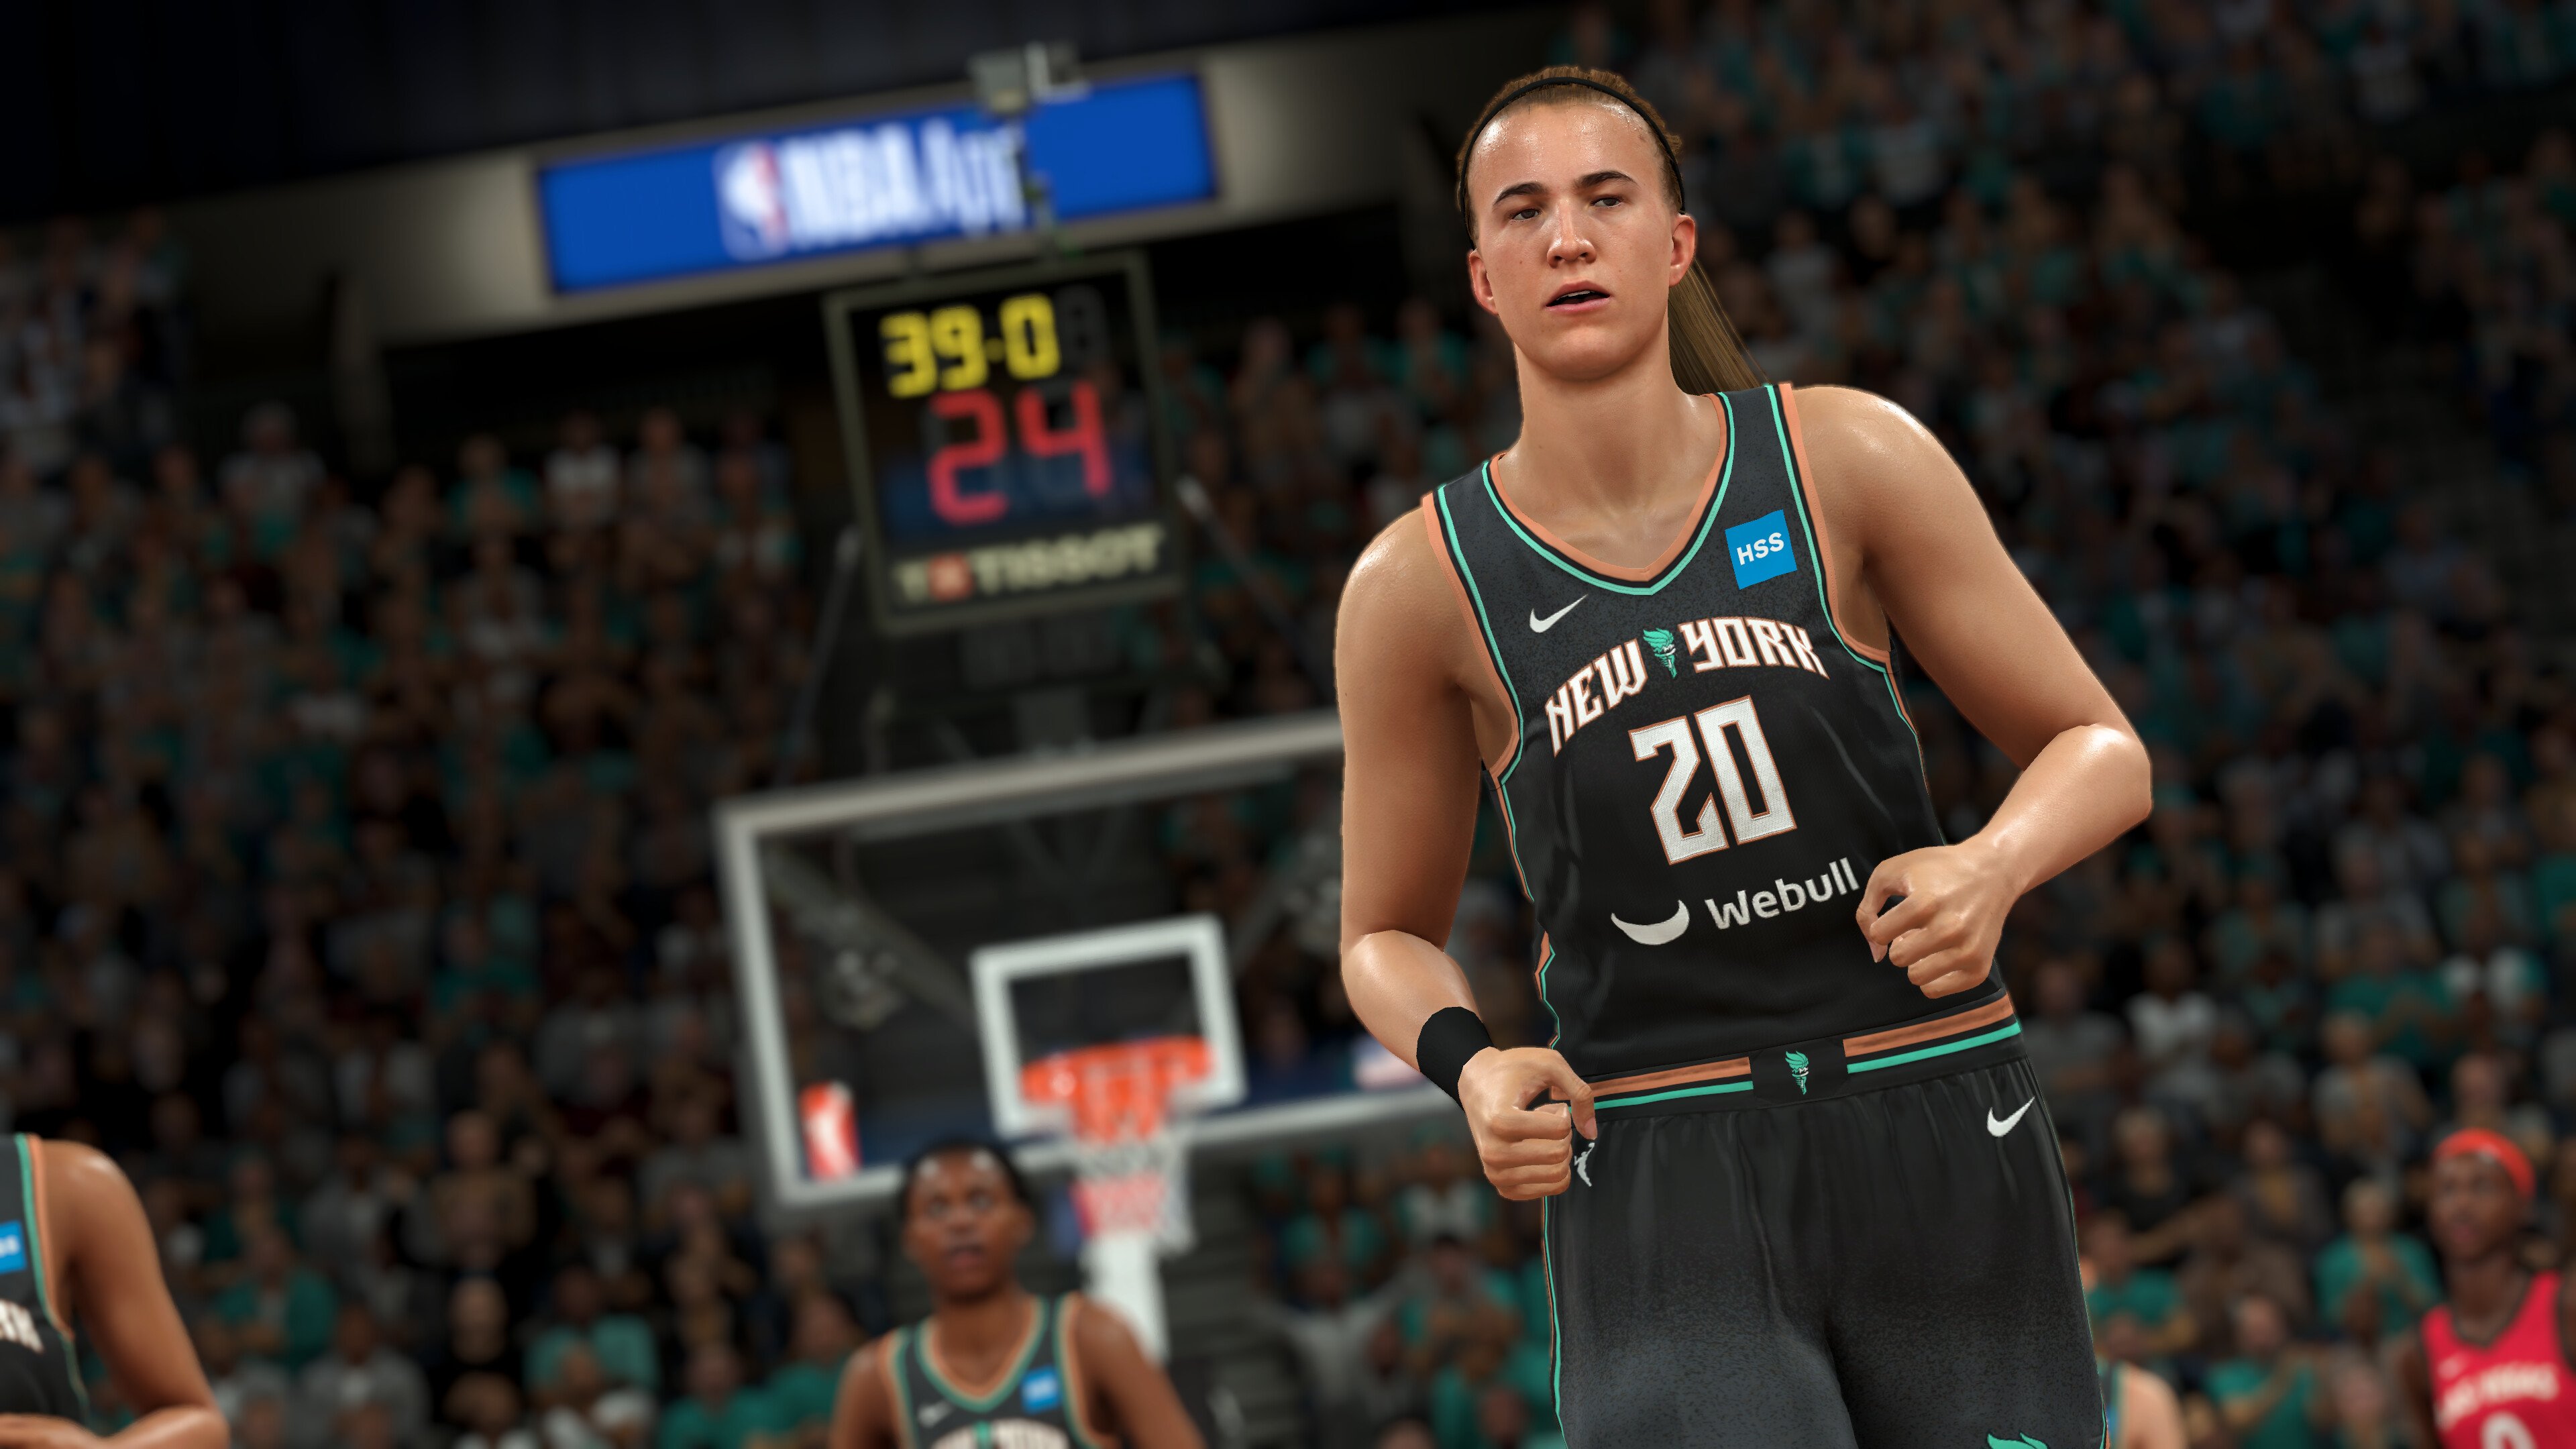 NBA 2K on X: These teams made the tourney and also made it into